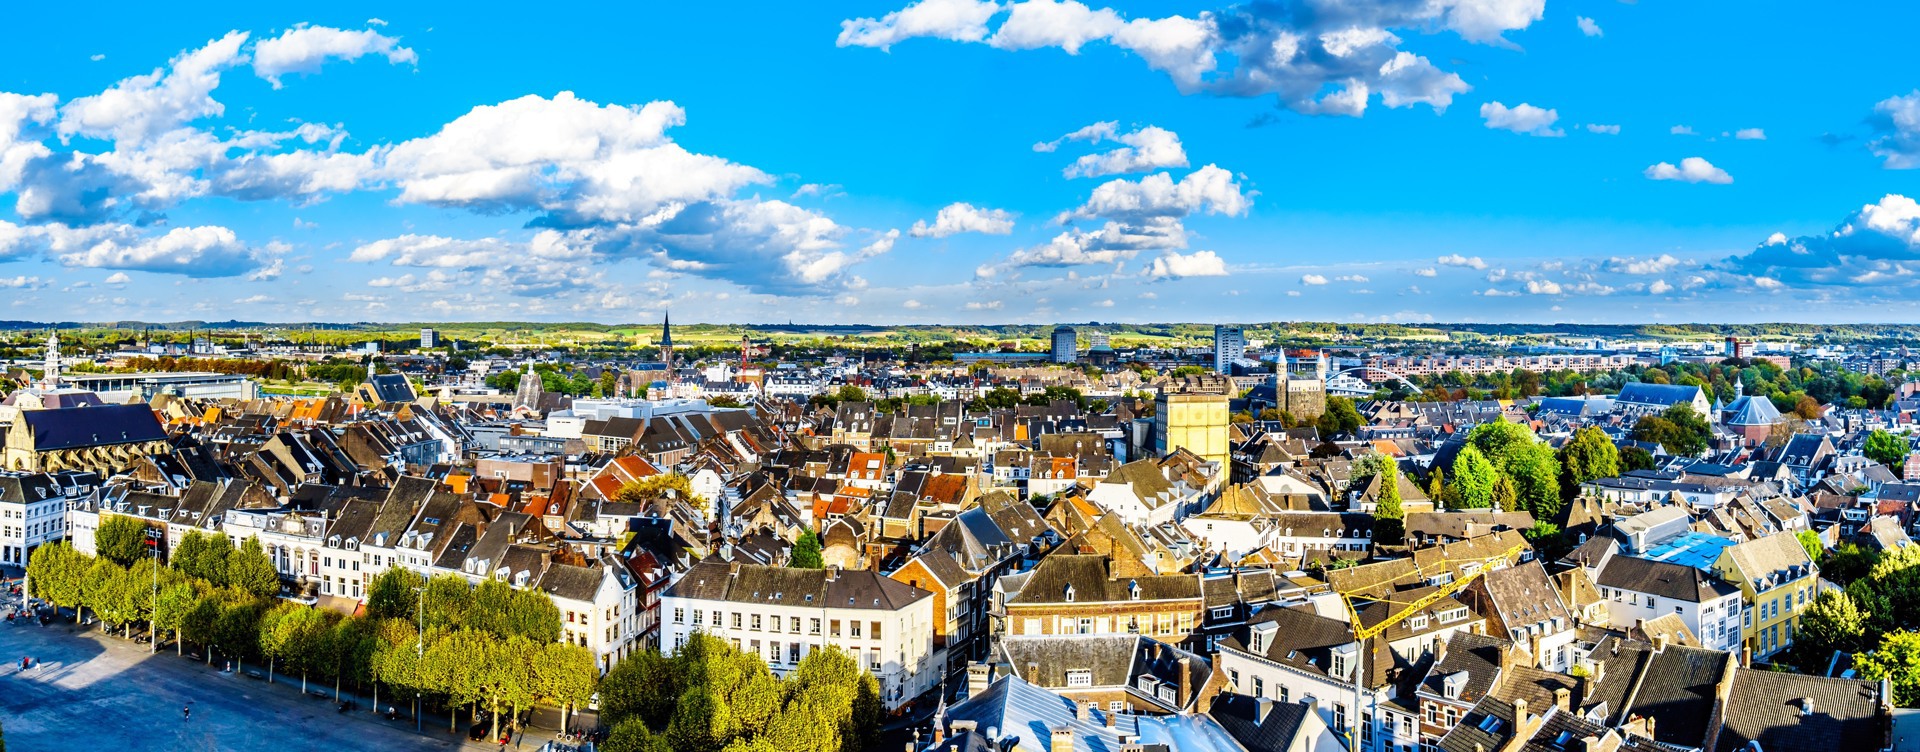 Visit the historic city centre 
of Maastricht